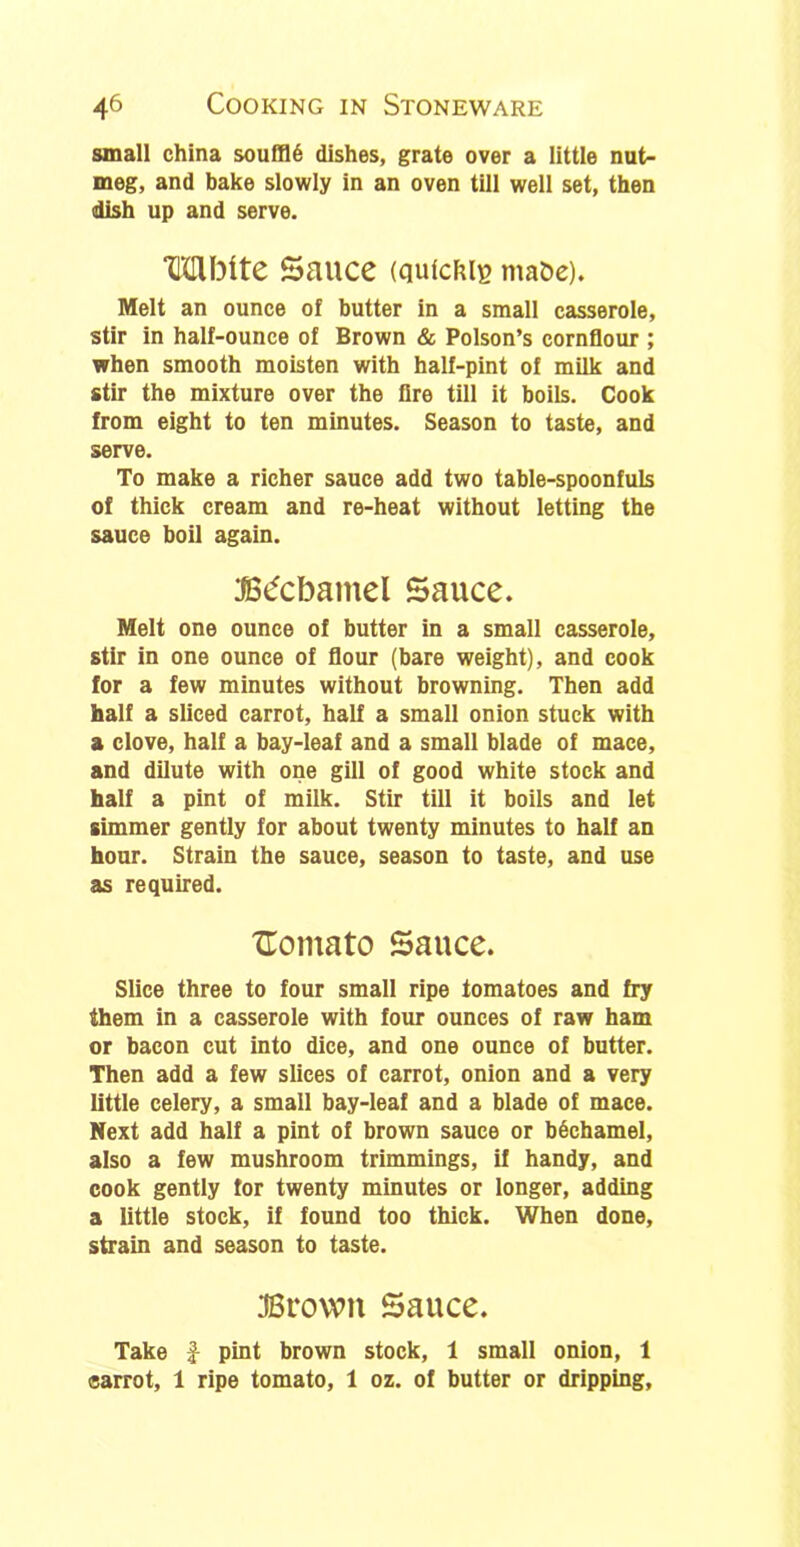 small china soufflS dishes, grate over a little nut- meg, and bake slowly in an oven till well set, then dish up and serve. ‘CGlbite Sauce (qutc&ie maoe). Melt an ounce of butter in a small casserole, stir in half-ounce of Brown & Poison’s cornflour ; when smooth moisten with half-pint of milk and stir the mixture over the lire till it boils. Cook from eight to ten minutes. Season to taste, and serve. To make a richer sauce add two table-spoonfuls of thick cream and re-heat without letting the sauce boil again. :B<5cbamel Sauce. Melt one ounce of butter in a small casserole, stir in one ounce of flour (bare weight), and cook for a few minutes without browning. Then add half a sliced carrot, half a small onion stuck with a clove, half a bay-leaf and a small blade of mace, and dilute with one gill of good white stock and half a pint of milk. Stir till it boils and let simmer gently for about twenty minutes to half an hour. Strain the sauce, season to taste, and use as required. Uomato Sauce. Slice three to four small ripe tomatoes and fry them in a casserole with four ounces of raw ham or bacon cut into dice, and one ounce of butter. Then add a few slices of carrot, onion and a very little celery, a small bay-leaf and a blade of mace. Next add half a pint of brown sauce or bechamel, also a few mushroom trimmings, if handy, and cook gently for twenty minutes or longer, adding a little stock, if found too thick. When done, strain and season to taste. 3Browit Sauce. Take £ pint brown stock, 1 small onion, 1 carrot, 1 ripe tomato, 1 oz. of butter or dripping.